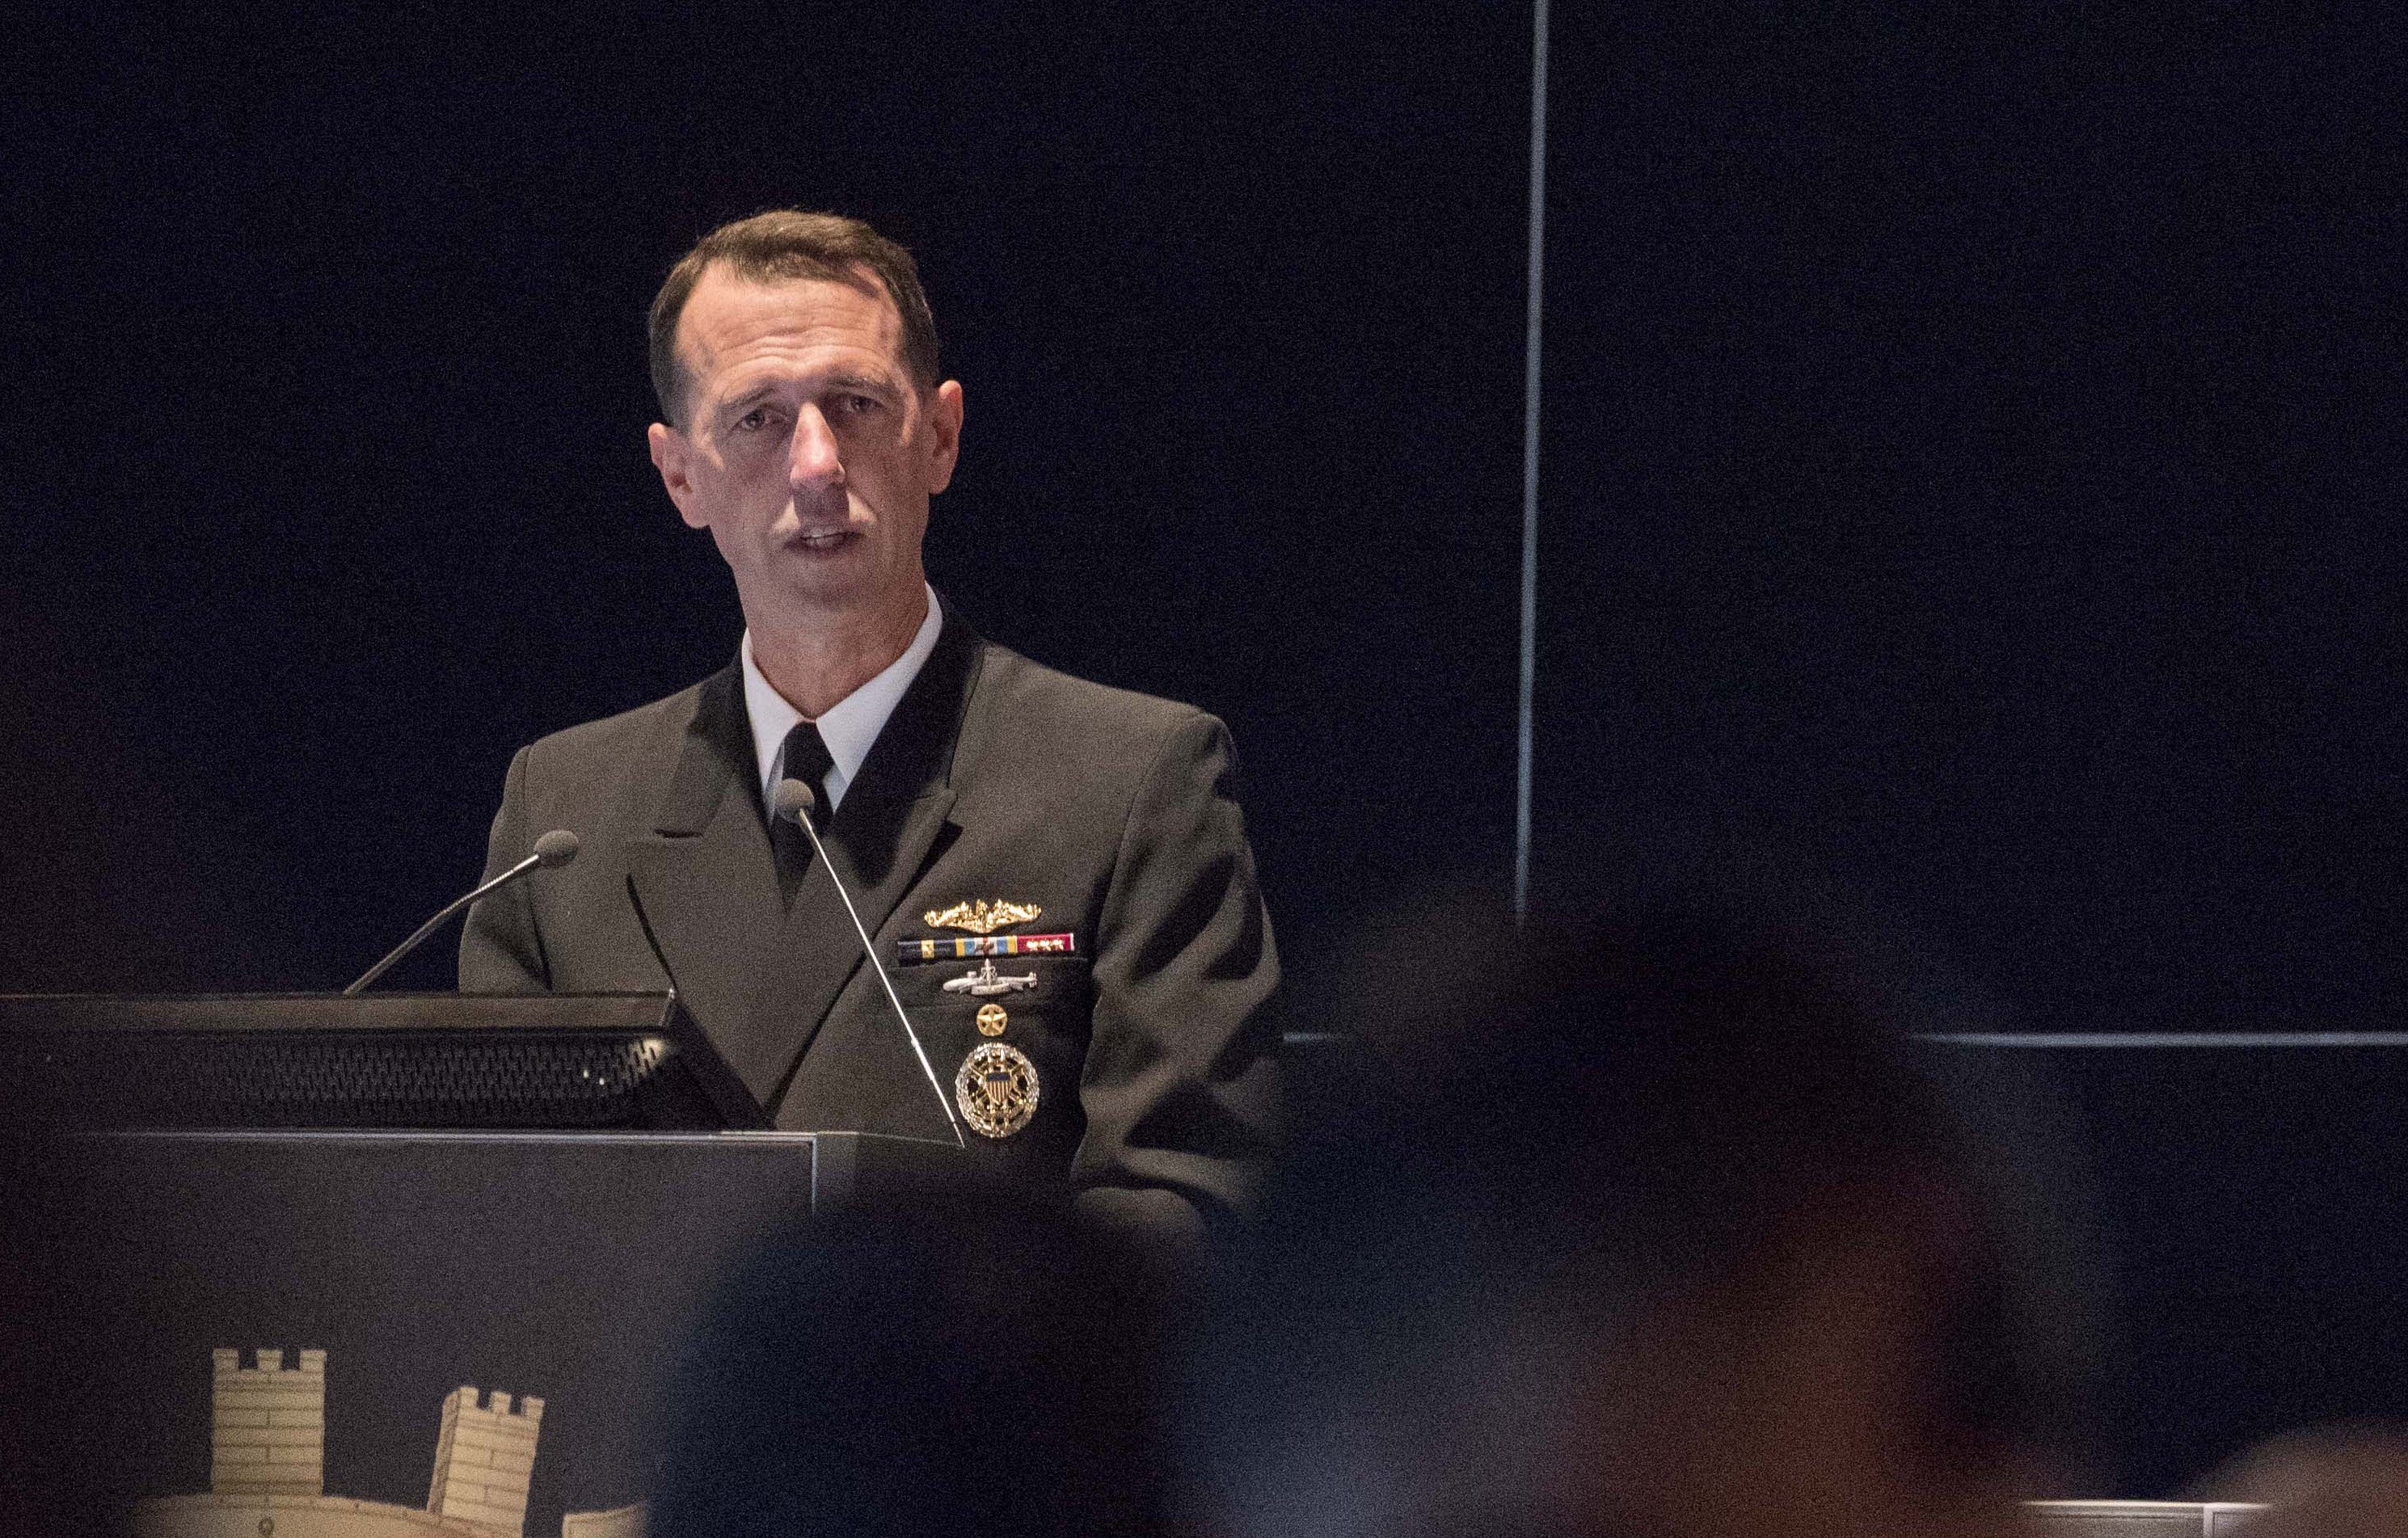 Adm. John Richardson attends the 10th Regional Seapower Symposium (RSS) for the Navies of the Mediterranean and Black Sea Countries in Venice, Italy on Oct, 22 2015. US Navy Photo